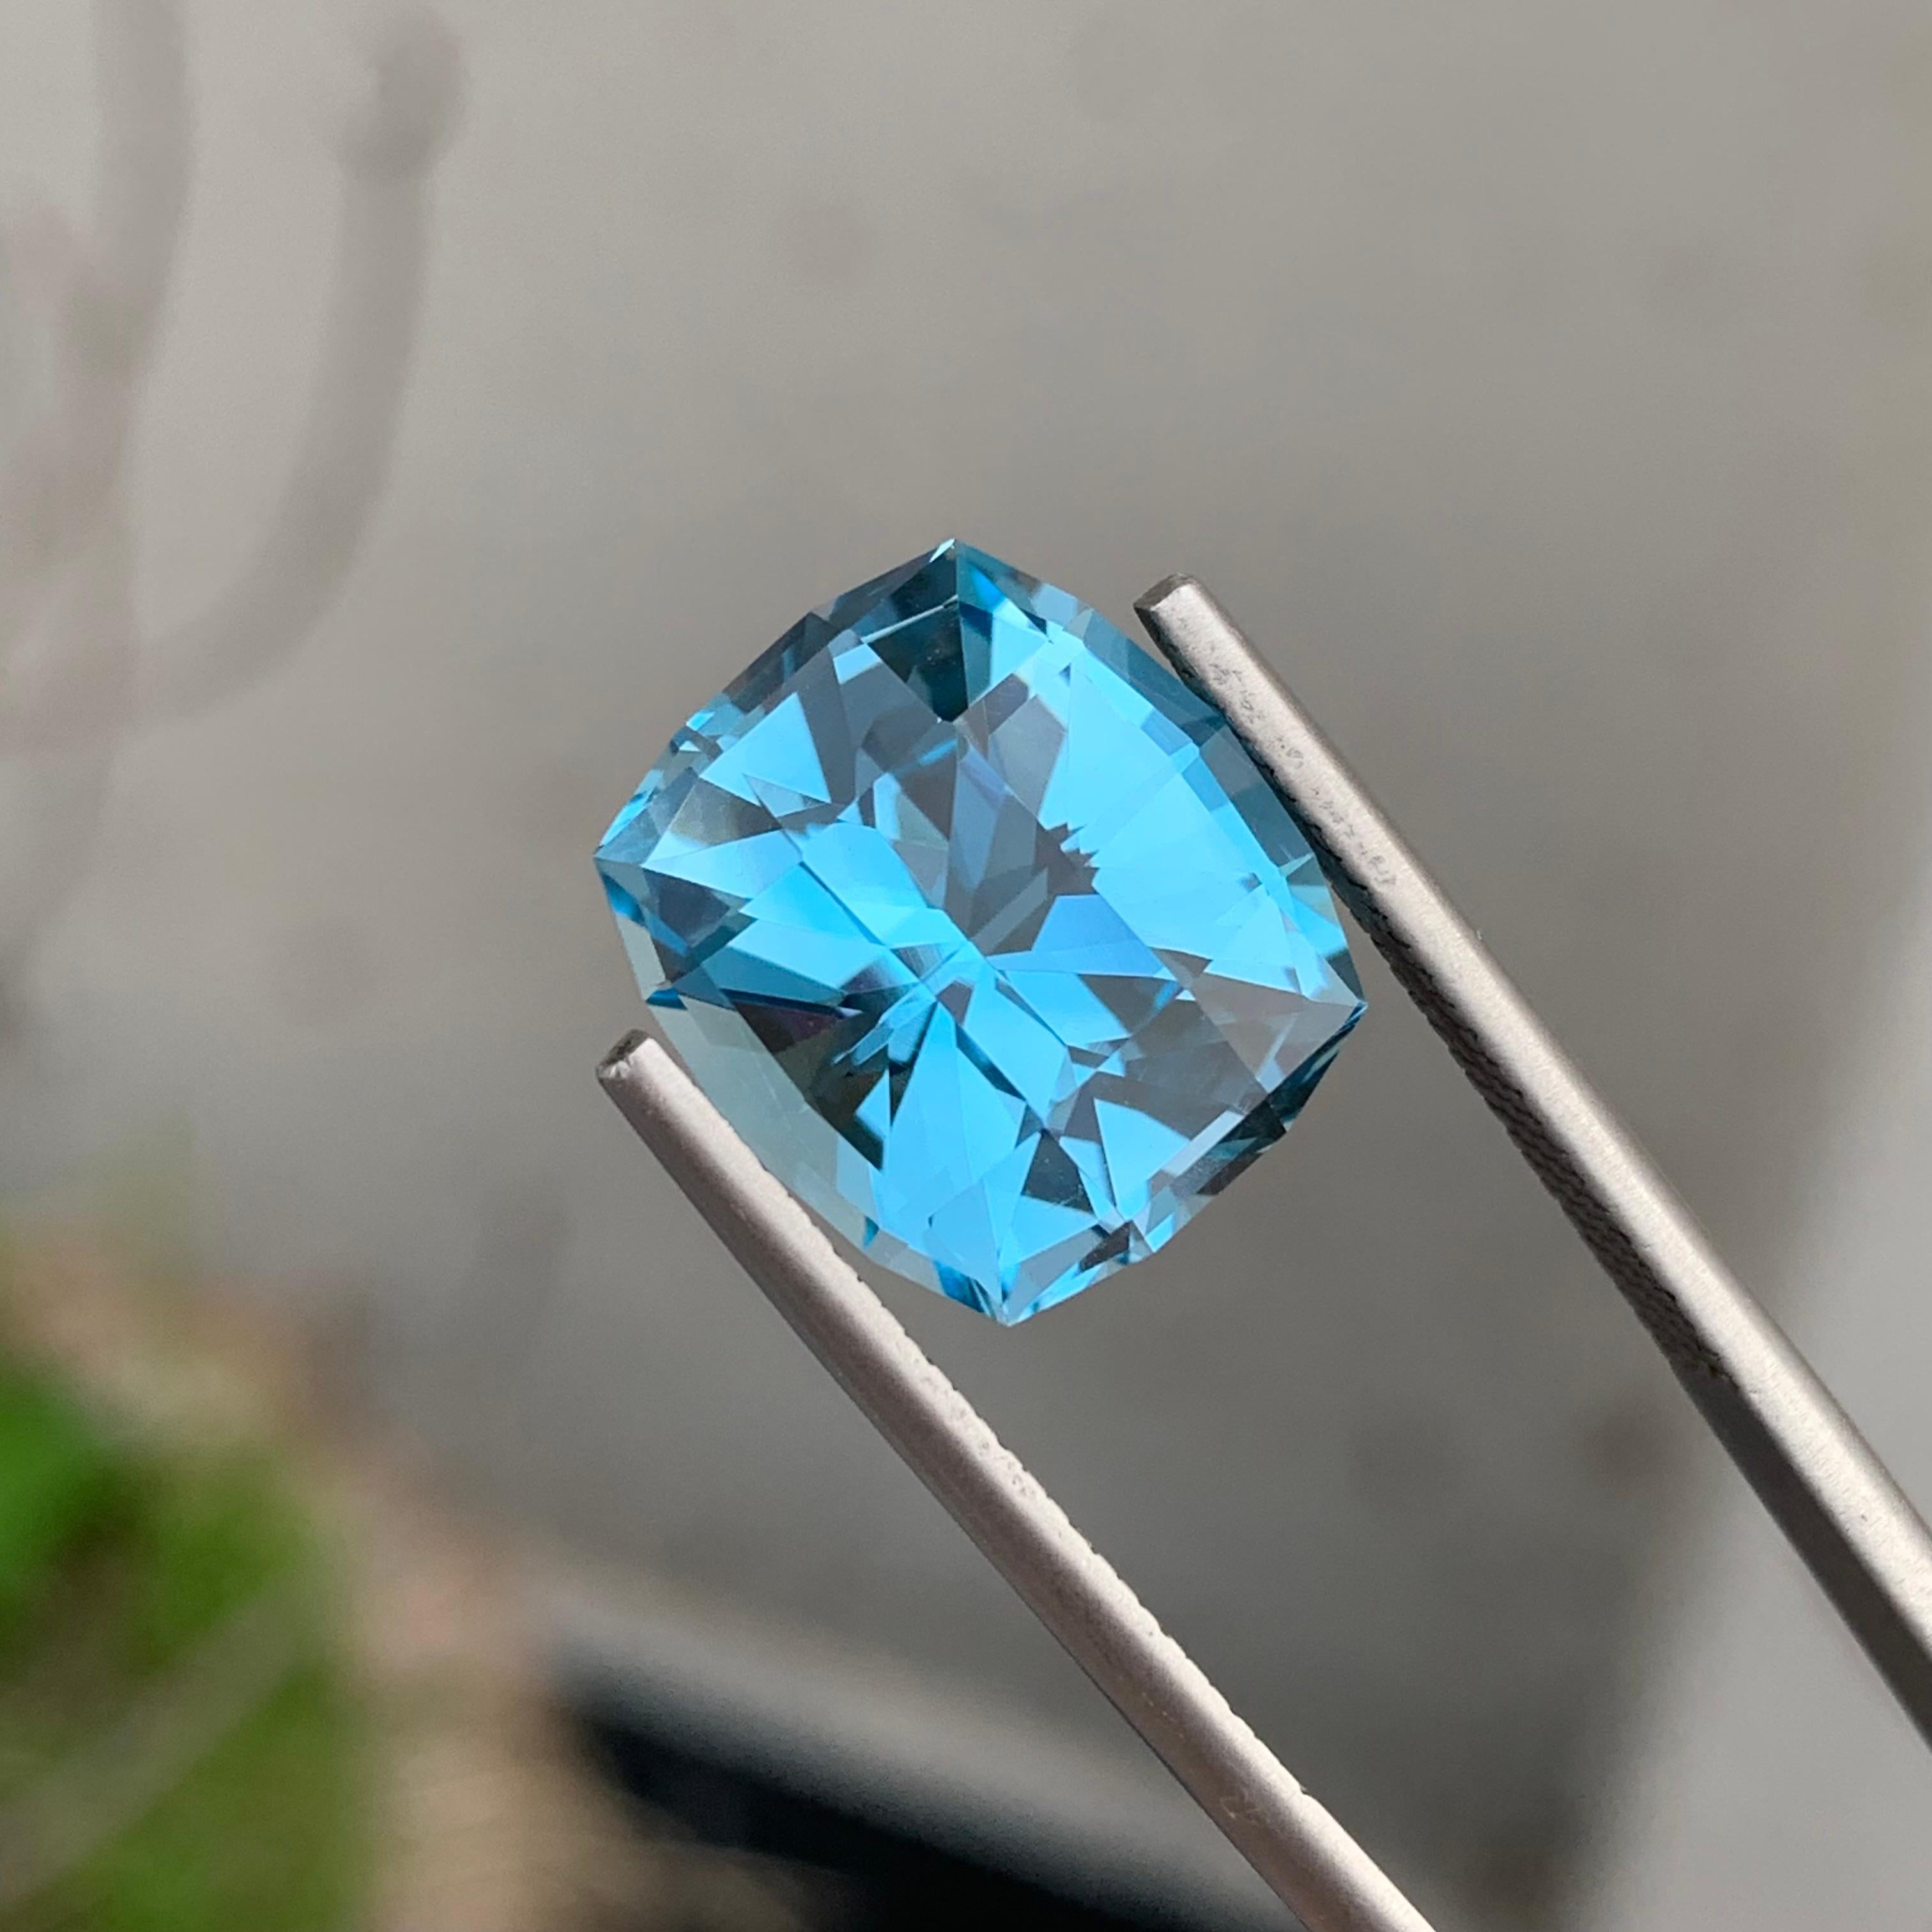 12.15 Carat Fancy Cut Faceted Sky Blue Topaz Gemstone For Jewellery Making  In New Condition For Sale In Peshawar, PK